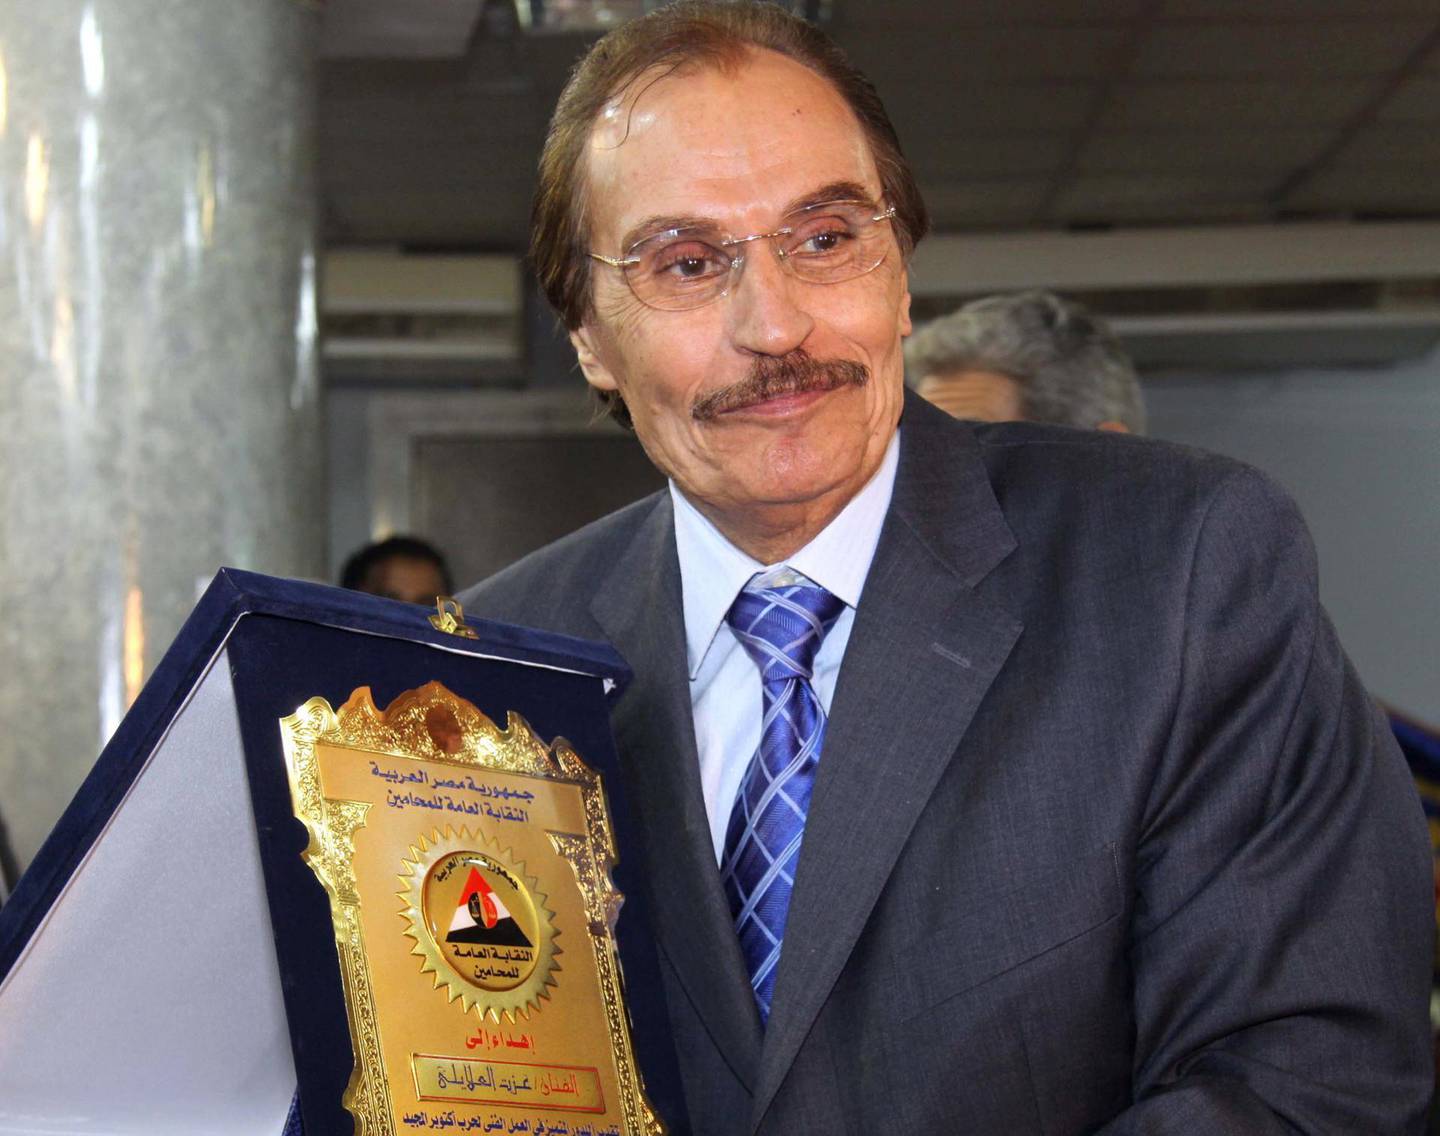 epa08988446 (FILE) - Egyptian actor Ezzat El Alaili poses for photographers with his award during an honoring held for the actors who participated in making films about the 6th of October war, in Cairo, Egypt, 18 October 2009 (reissued 05 February 2021). El Alaili died in Cairo, Egypt, on 05 February 2021 at the age of 86.  EPA/MOHAMED OMAR